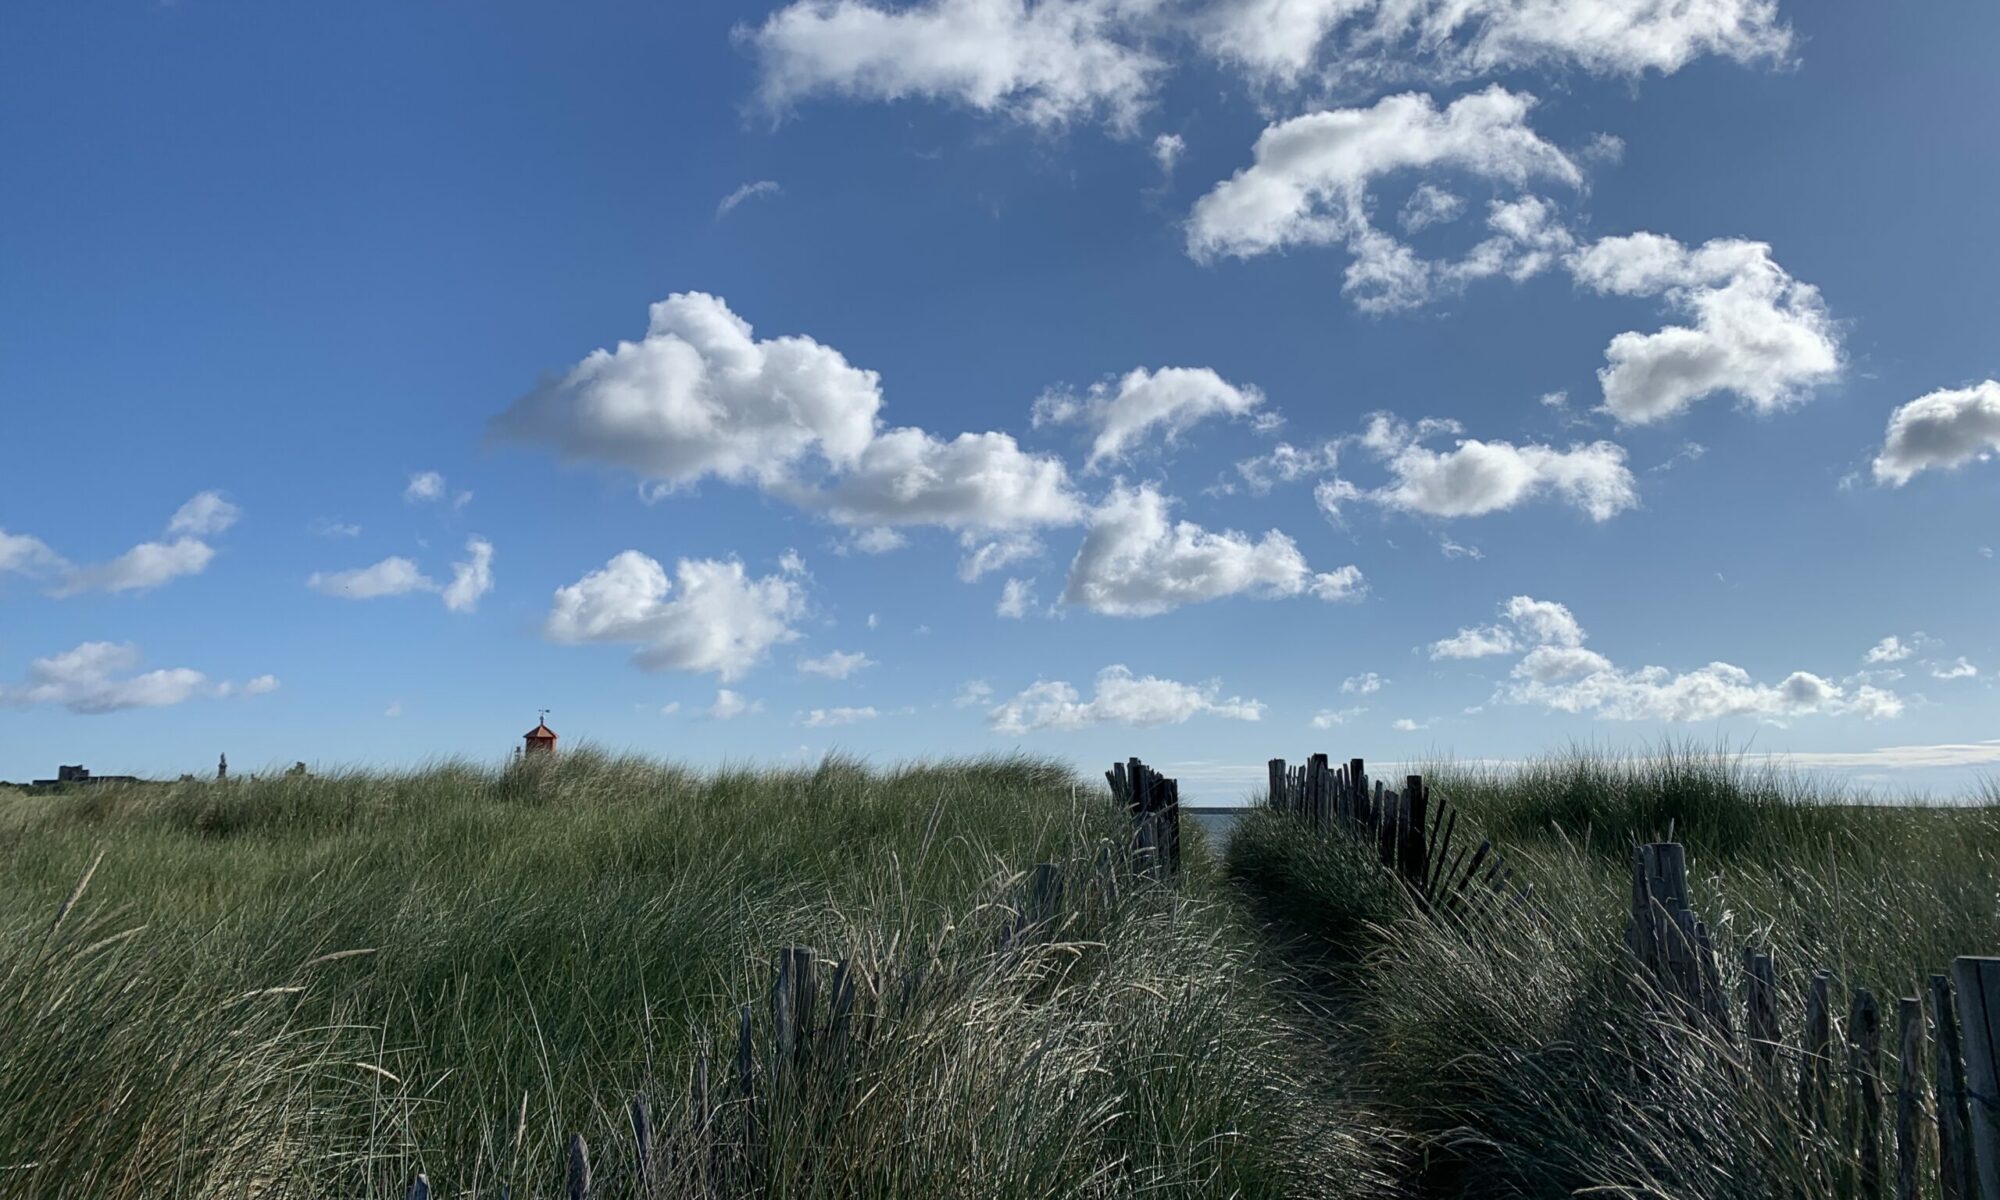 Sand dunes at Littlehaven, South Shields, South Tyneside